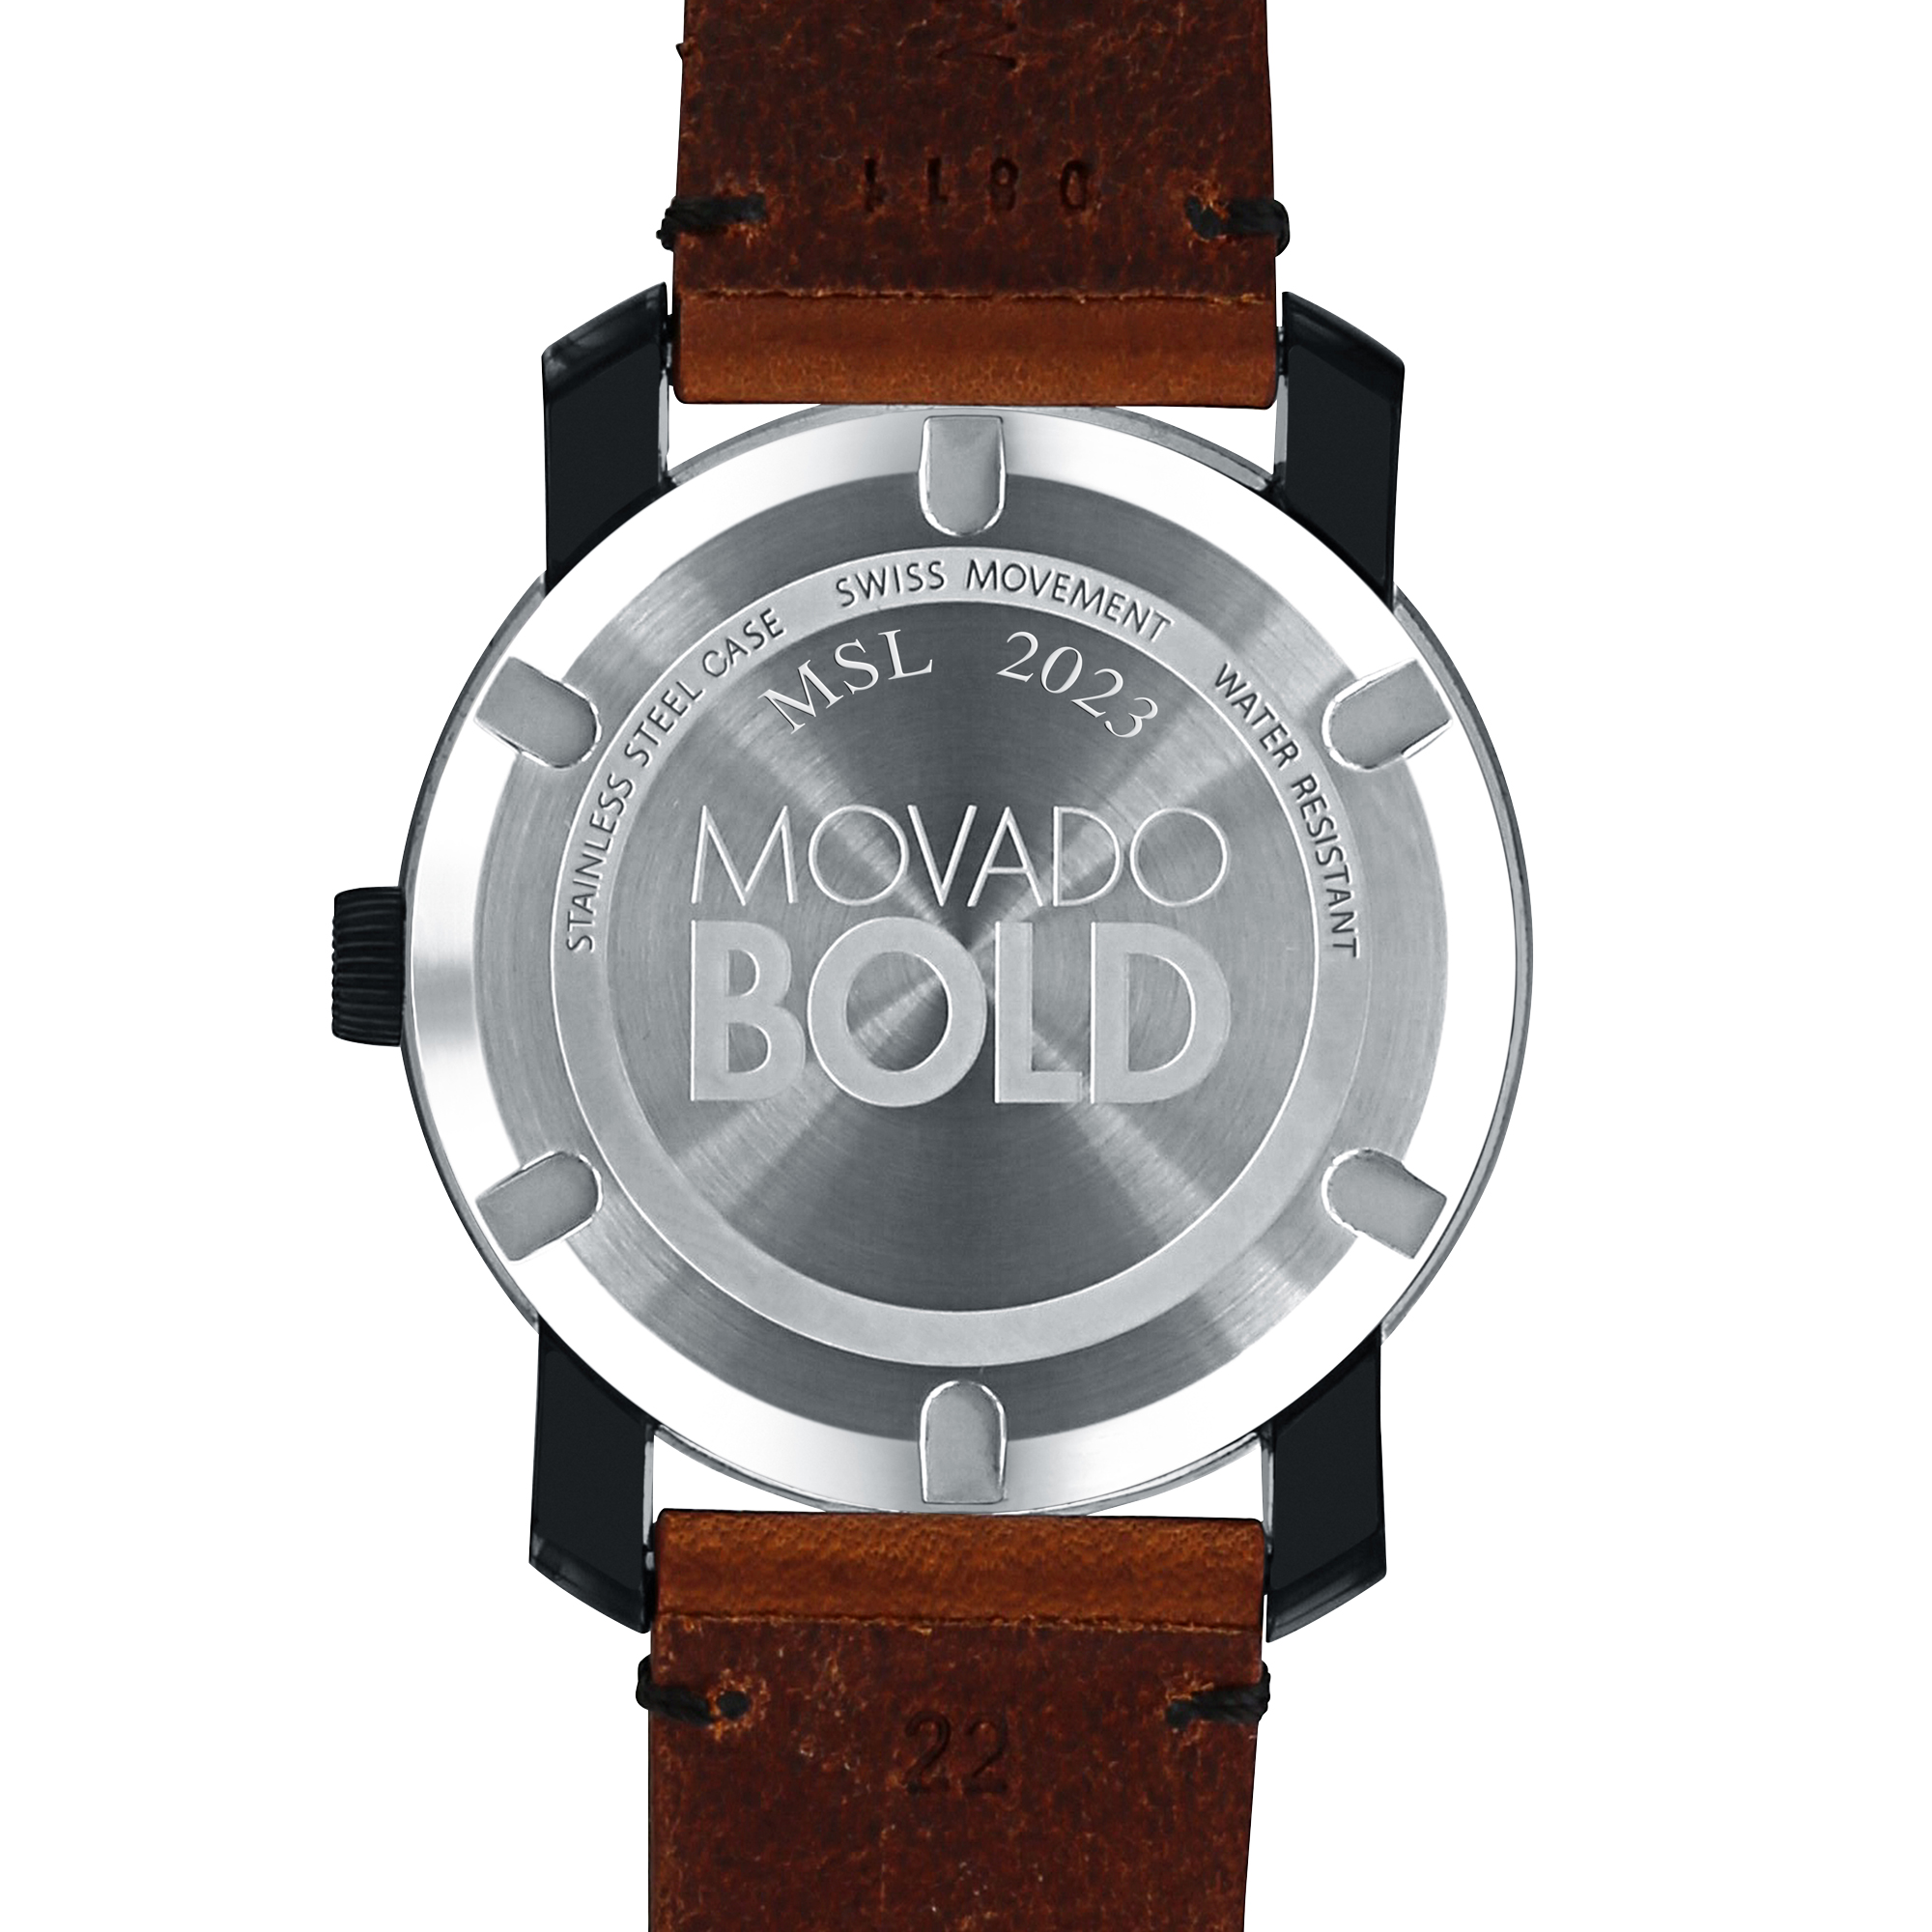 Oral Roberts University Men's Movado BOLD with Brown Leather Strap - Image 3